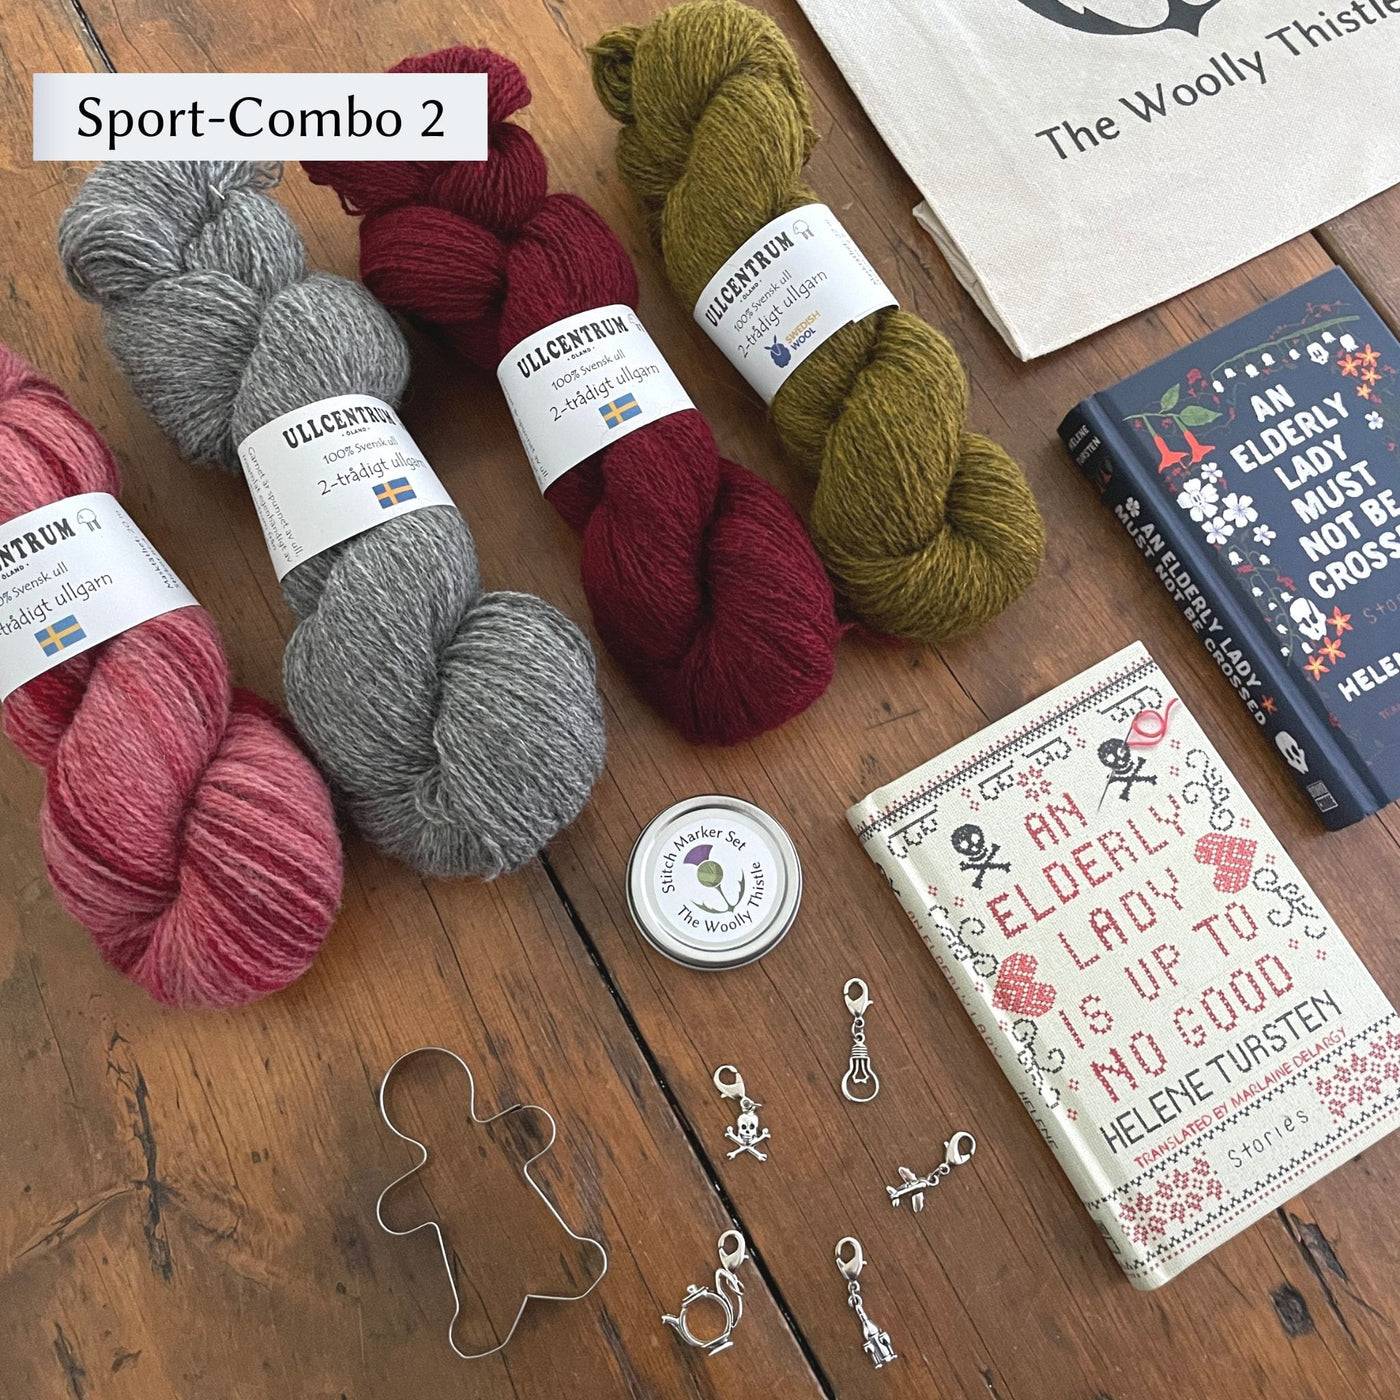 The Swedish Book Bundle components which include two books by Helene Tursten, TWT Tote bag, Stitch marker set, gingerbread cookie cutter, and Ullcentrum Sport Weight yarn. Components are shown and laid out on table. Yarn colors in Sport Combo 2 include a variegated red, grey, deep red, and gold/green.